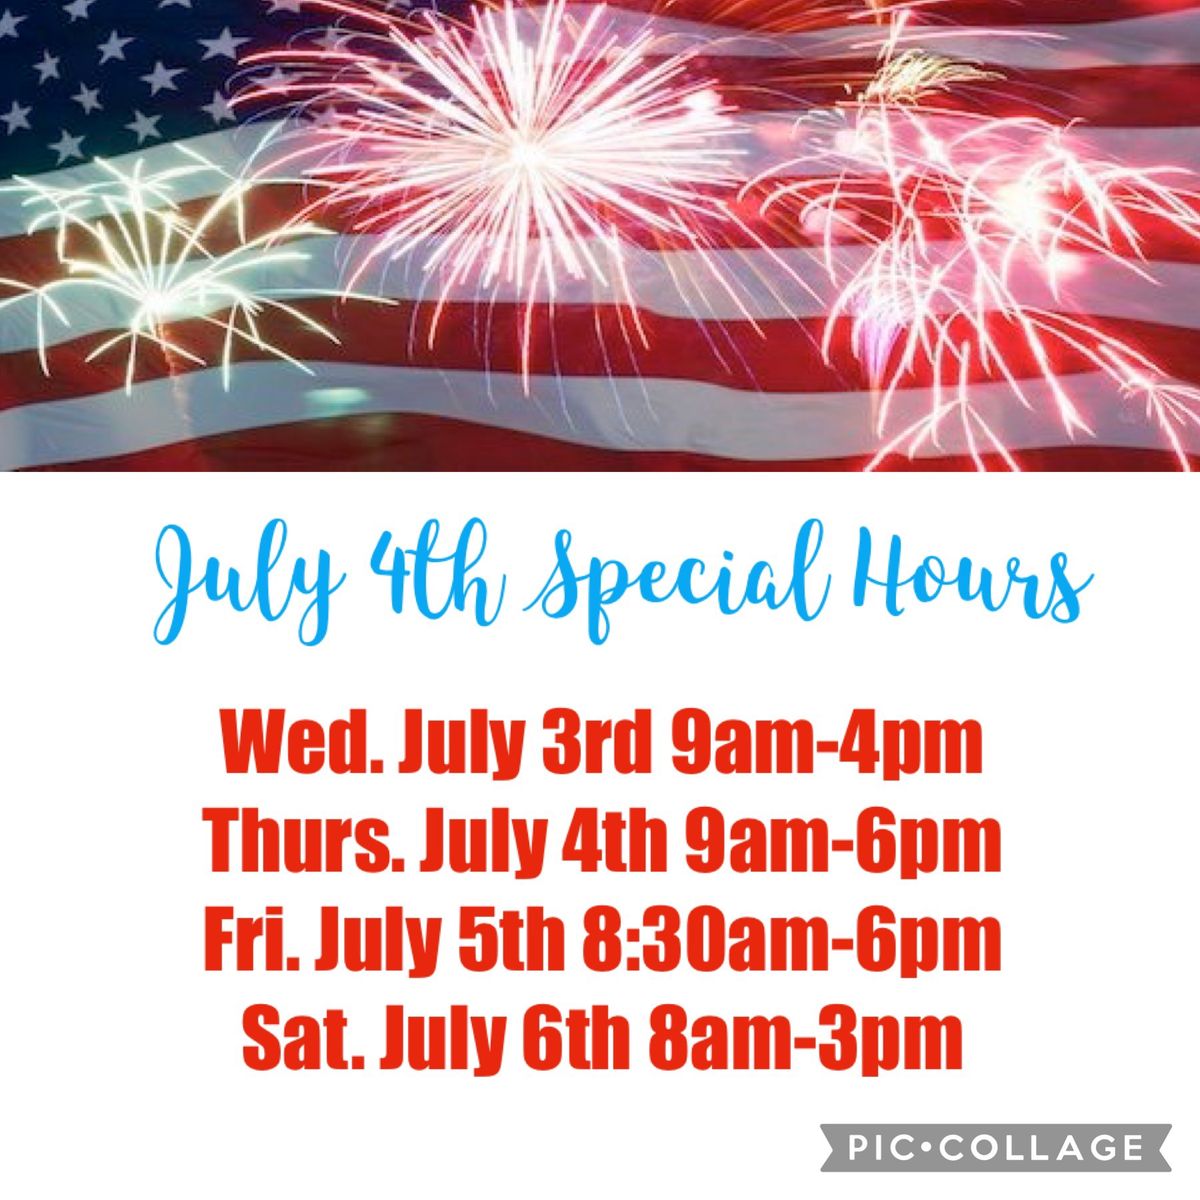 PIG ROAST and SPECIAL HOURS for JULY 4th